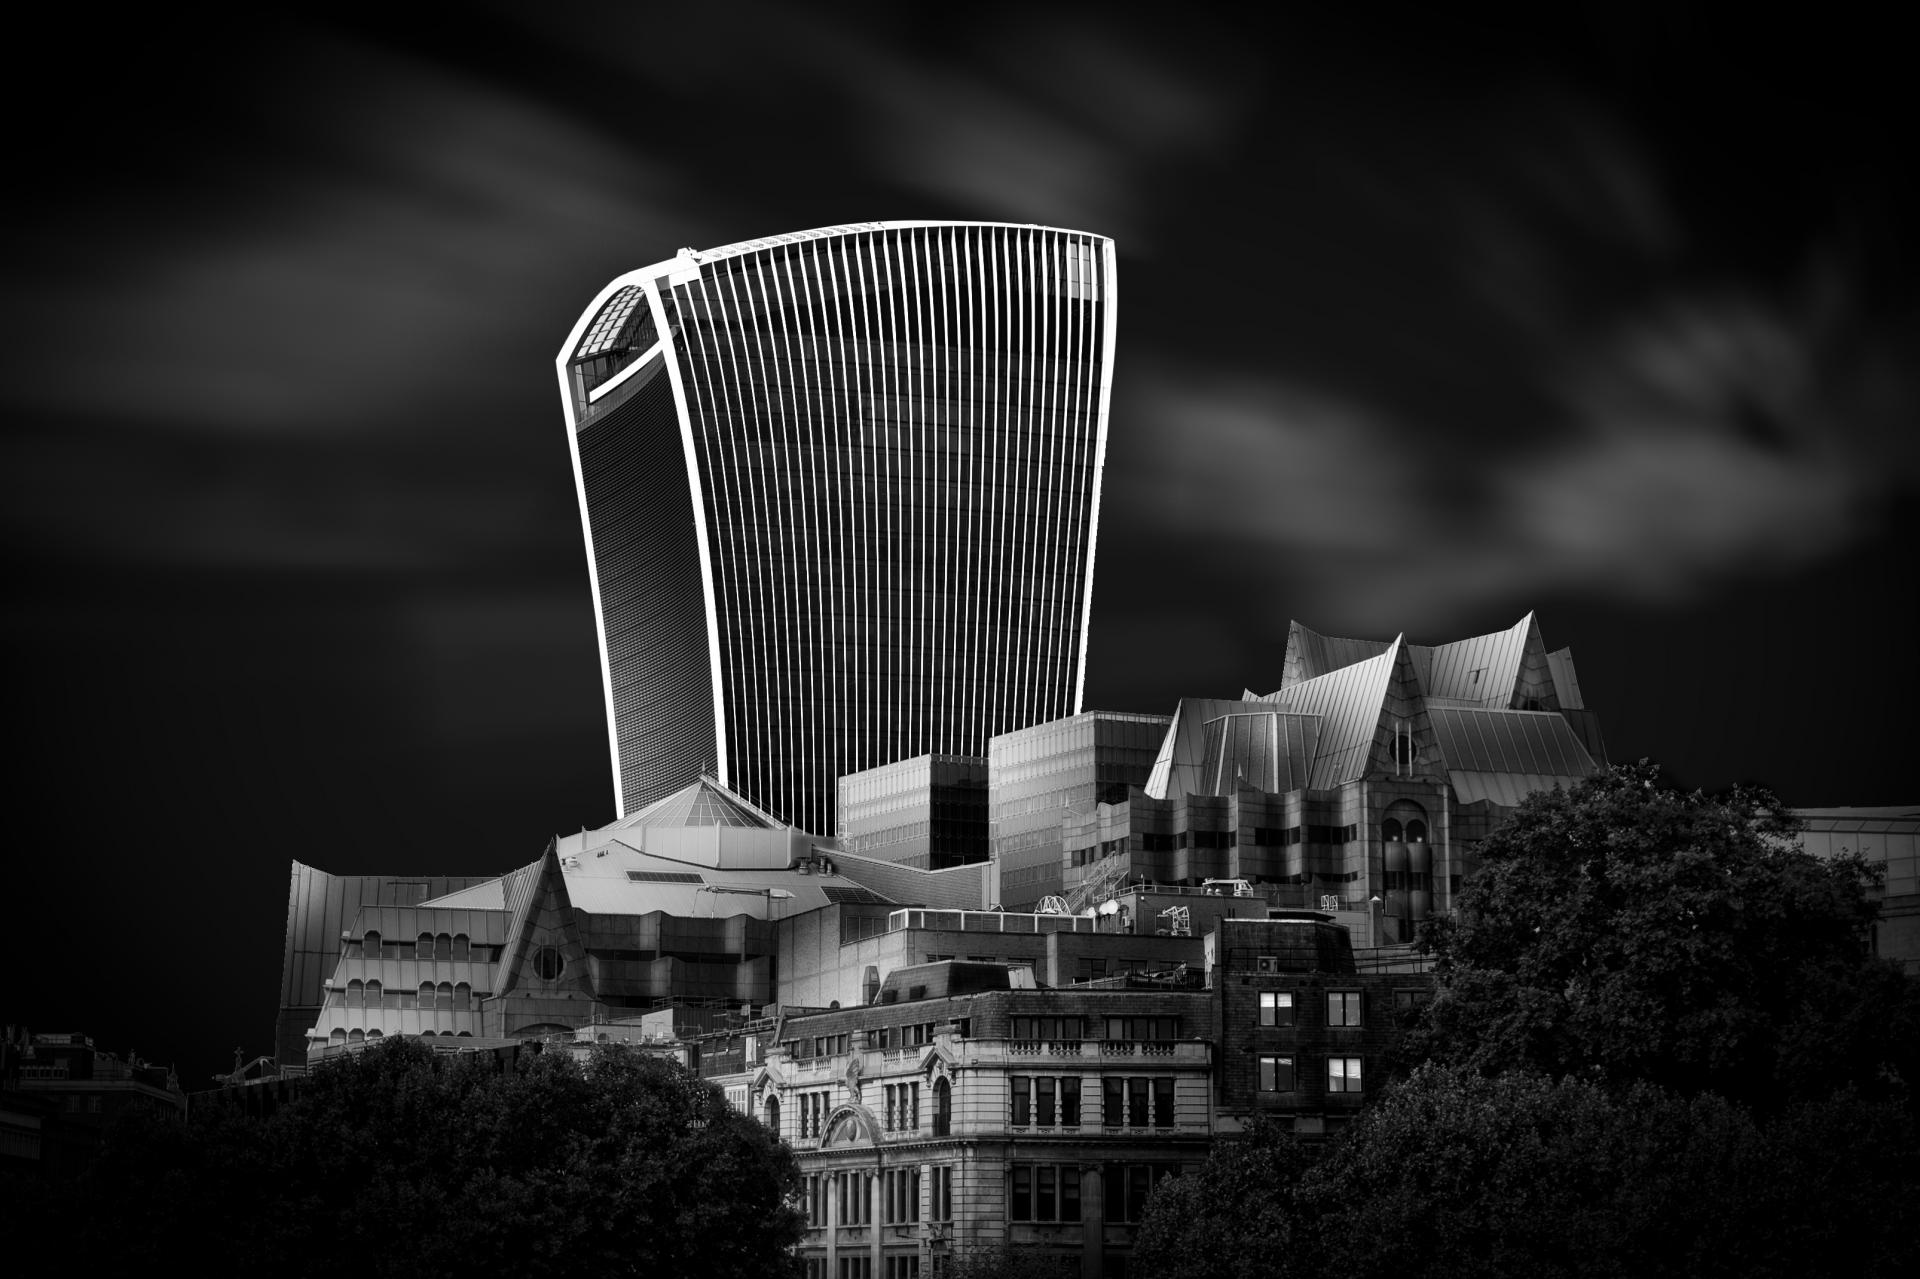 The Walkie-Talkie - MUSE Photography Winner